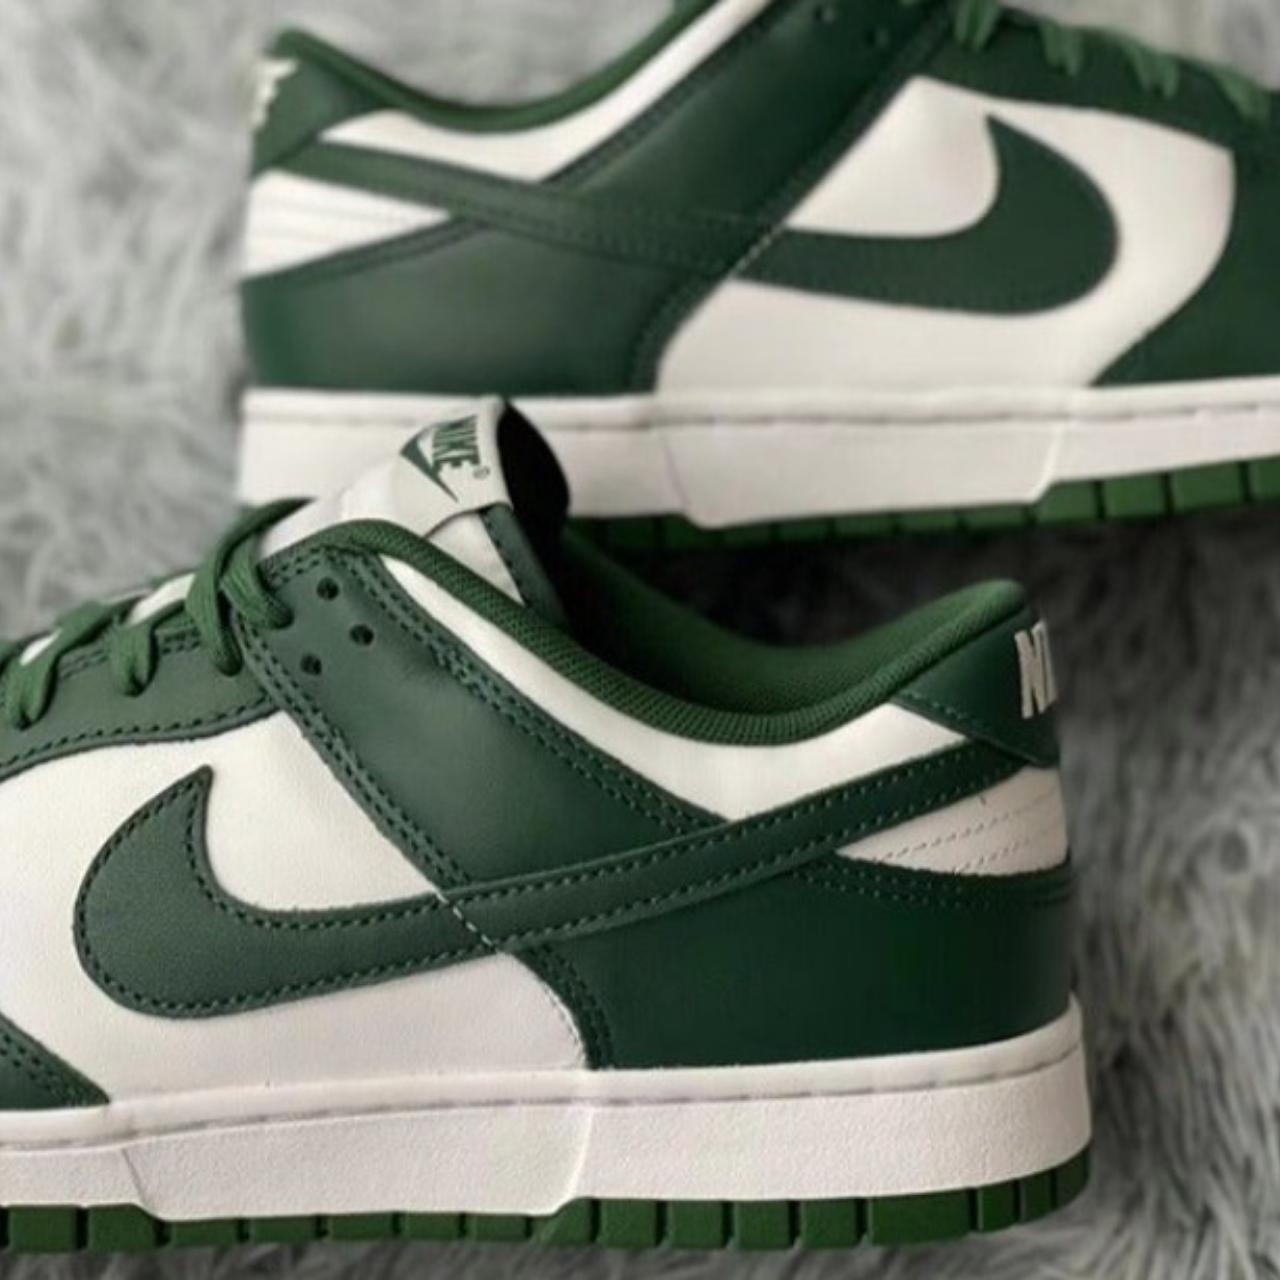 Nike Dunk Lows Michigan State White and Green New... - Depop